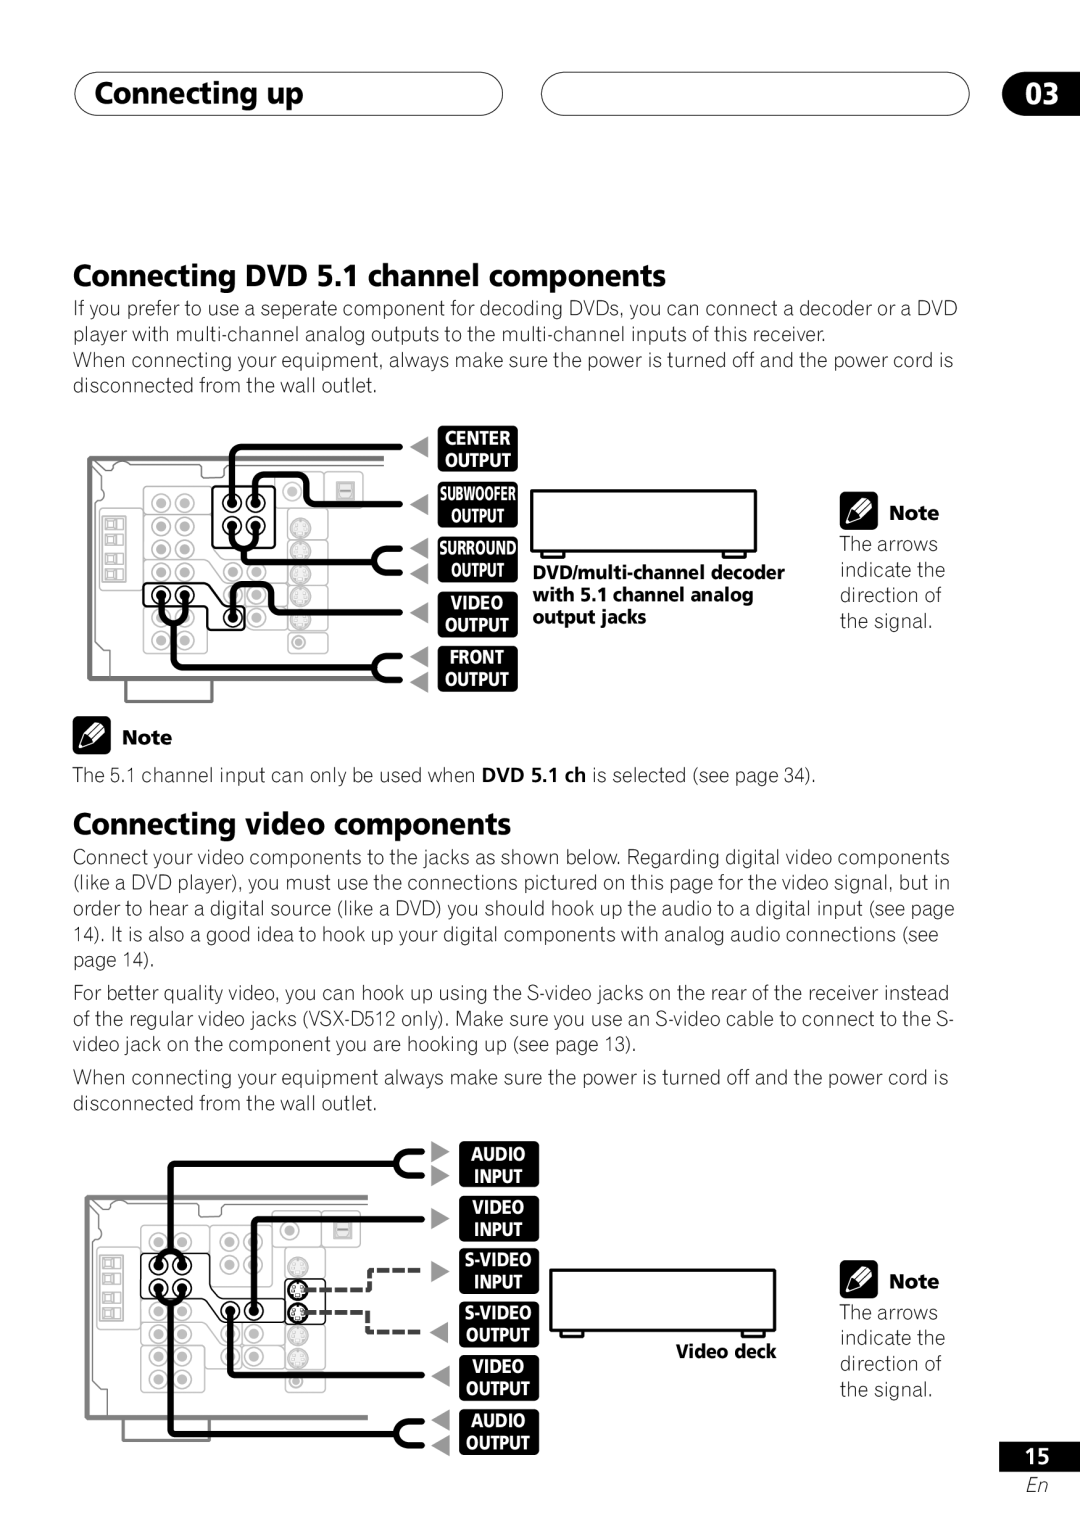 Pioneer vsx-d412 manual Connecting DVD 5.1 channel components, Connecting video components, Connecting up 